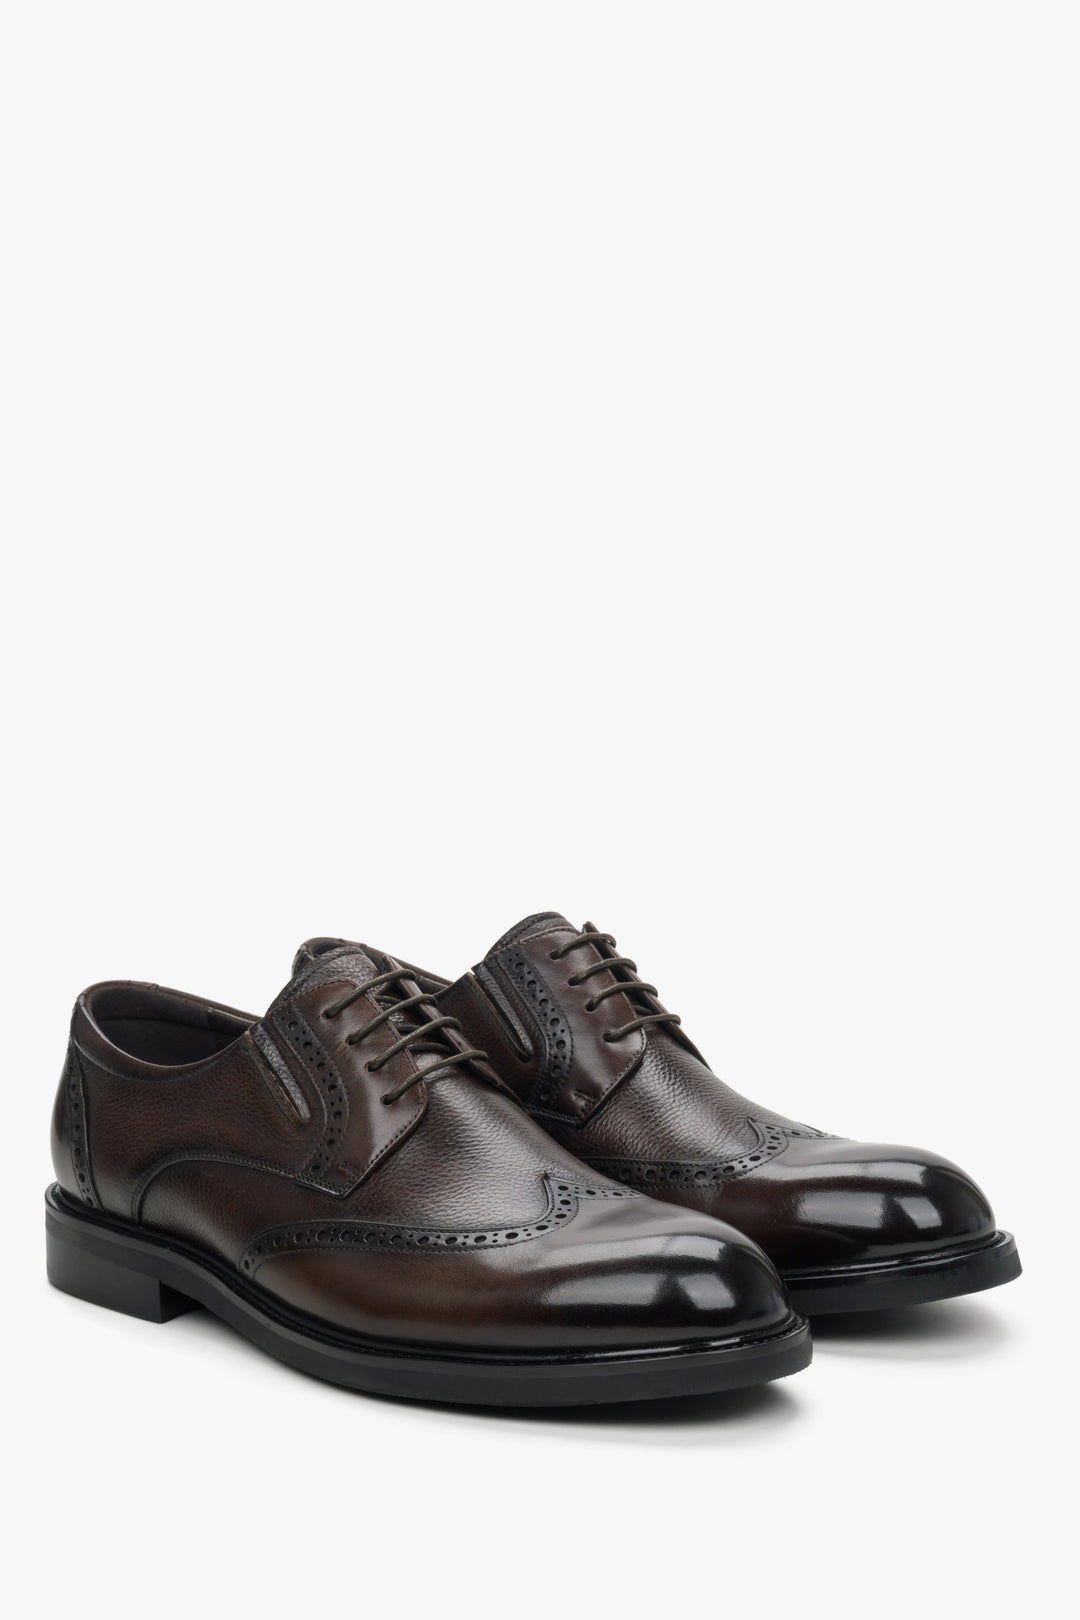 Estro men's brown leather shoes with decorative perforation.